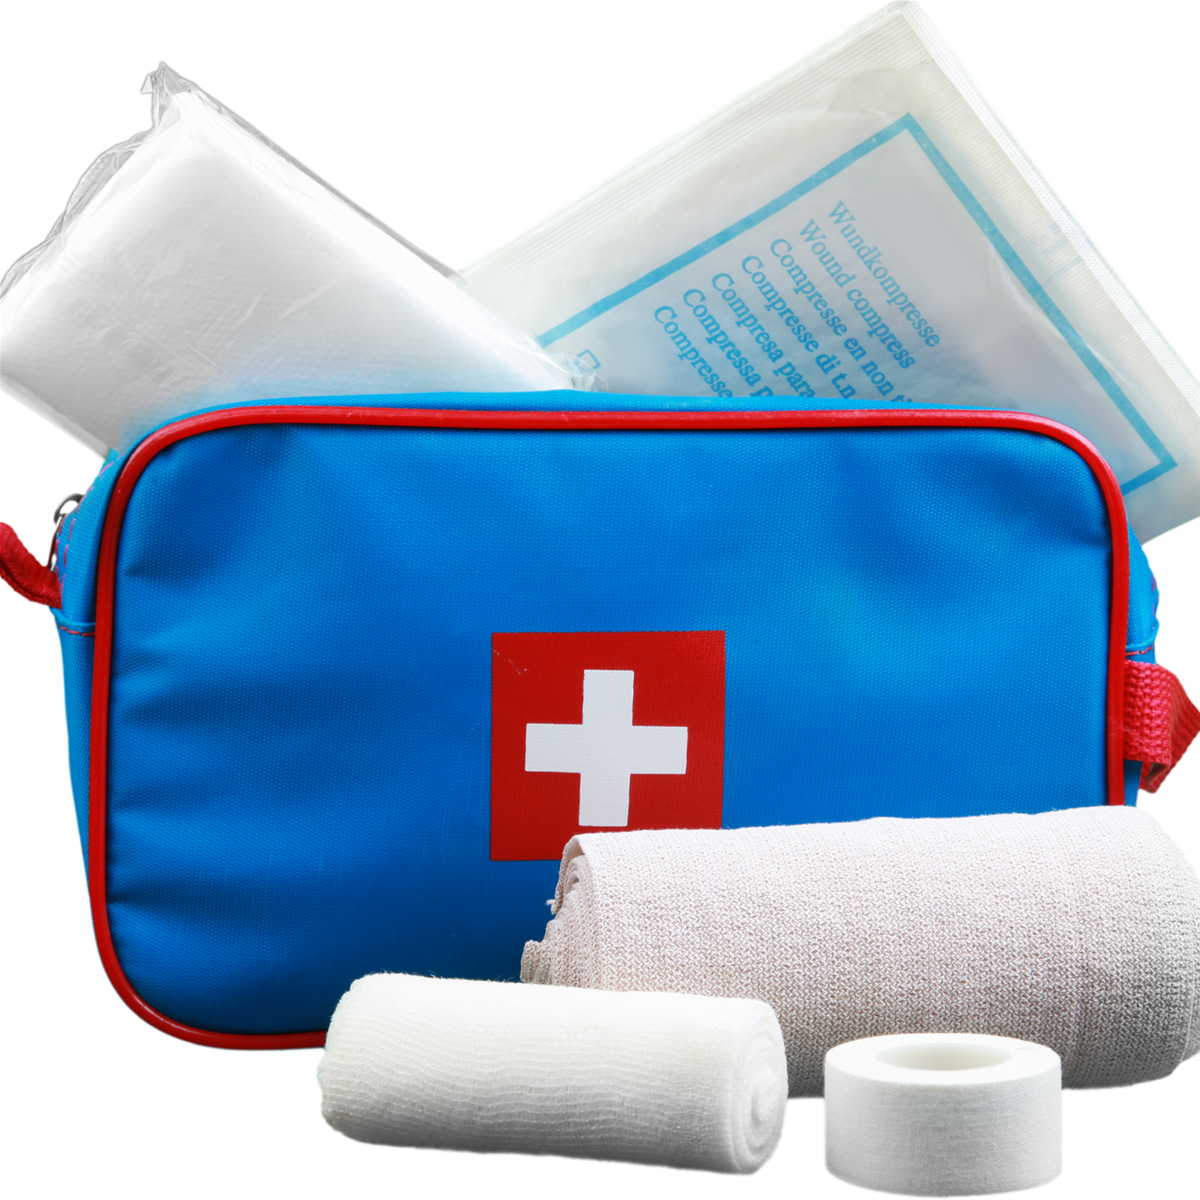 First Aid Kits are a necessity for homeowners to include in their vacation rental property